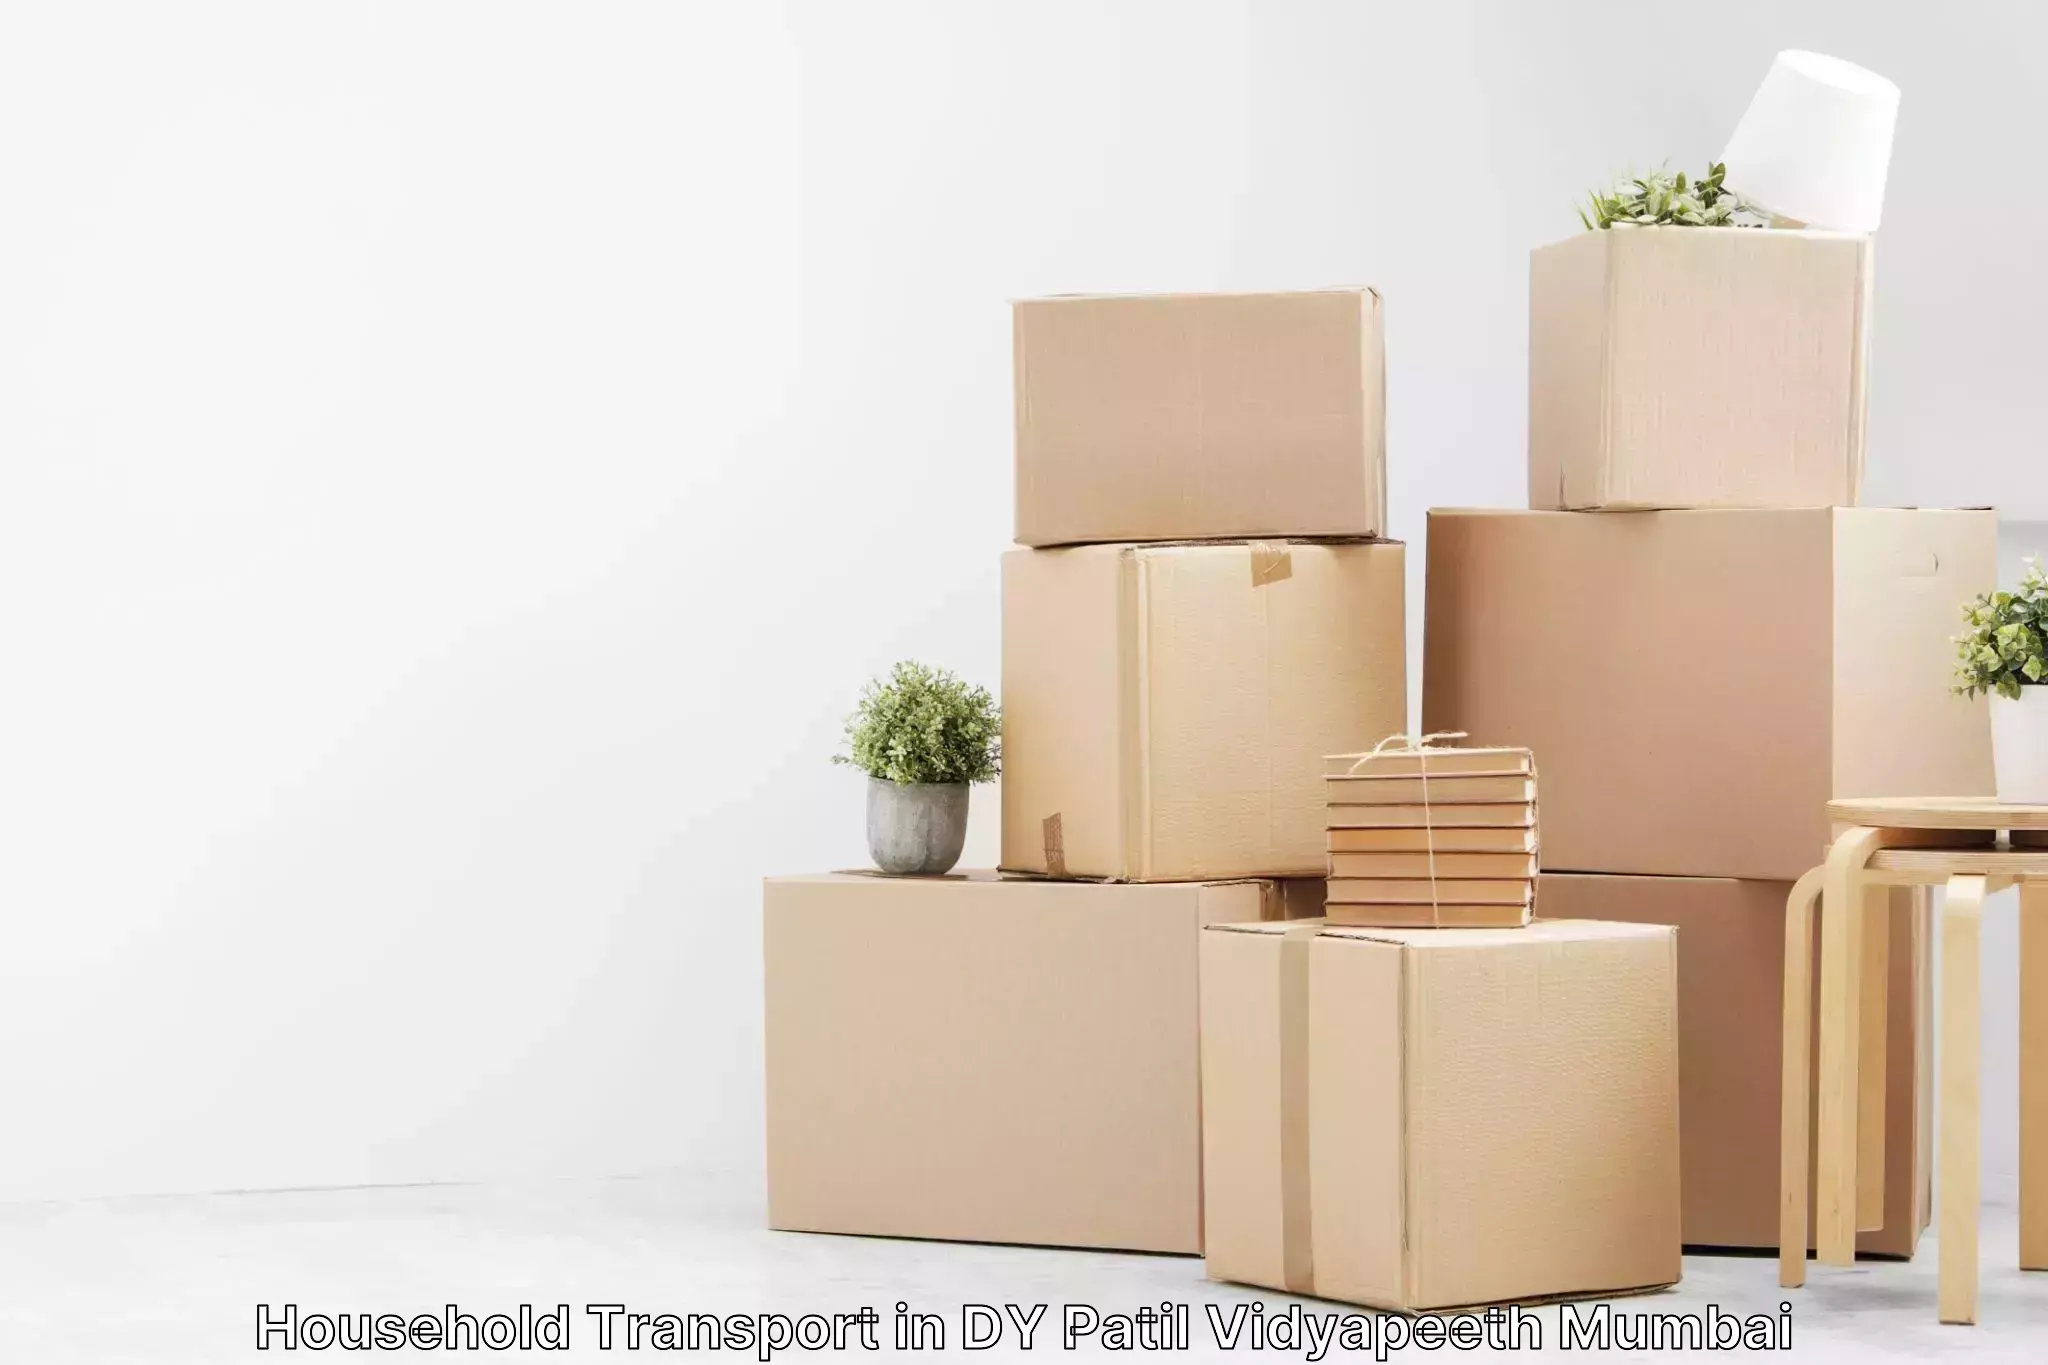 Professional home movers in DY Patil Vidyapeeth Mumbai